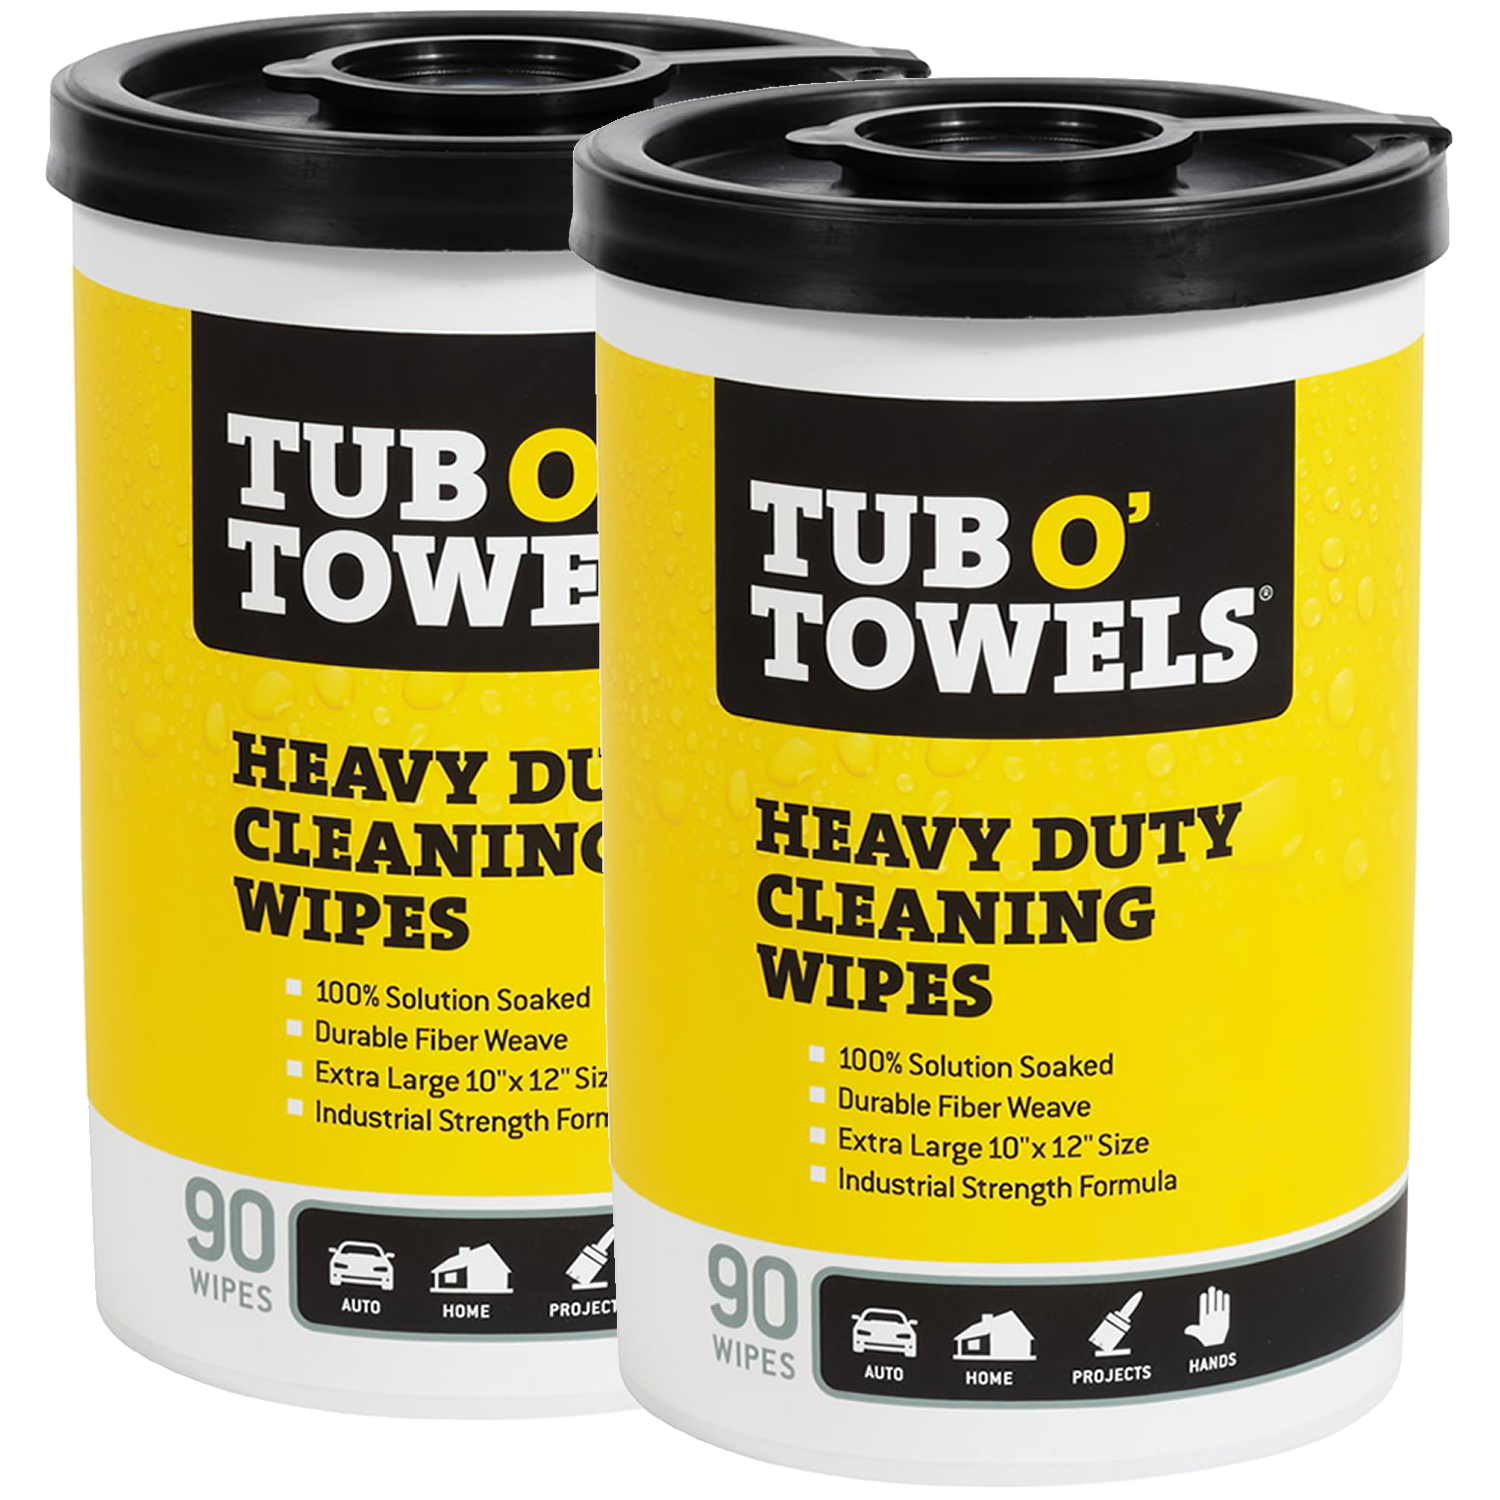 Tub O' Towels Heavy Duty Cleaning Wipes - 2 Pack